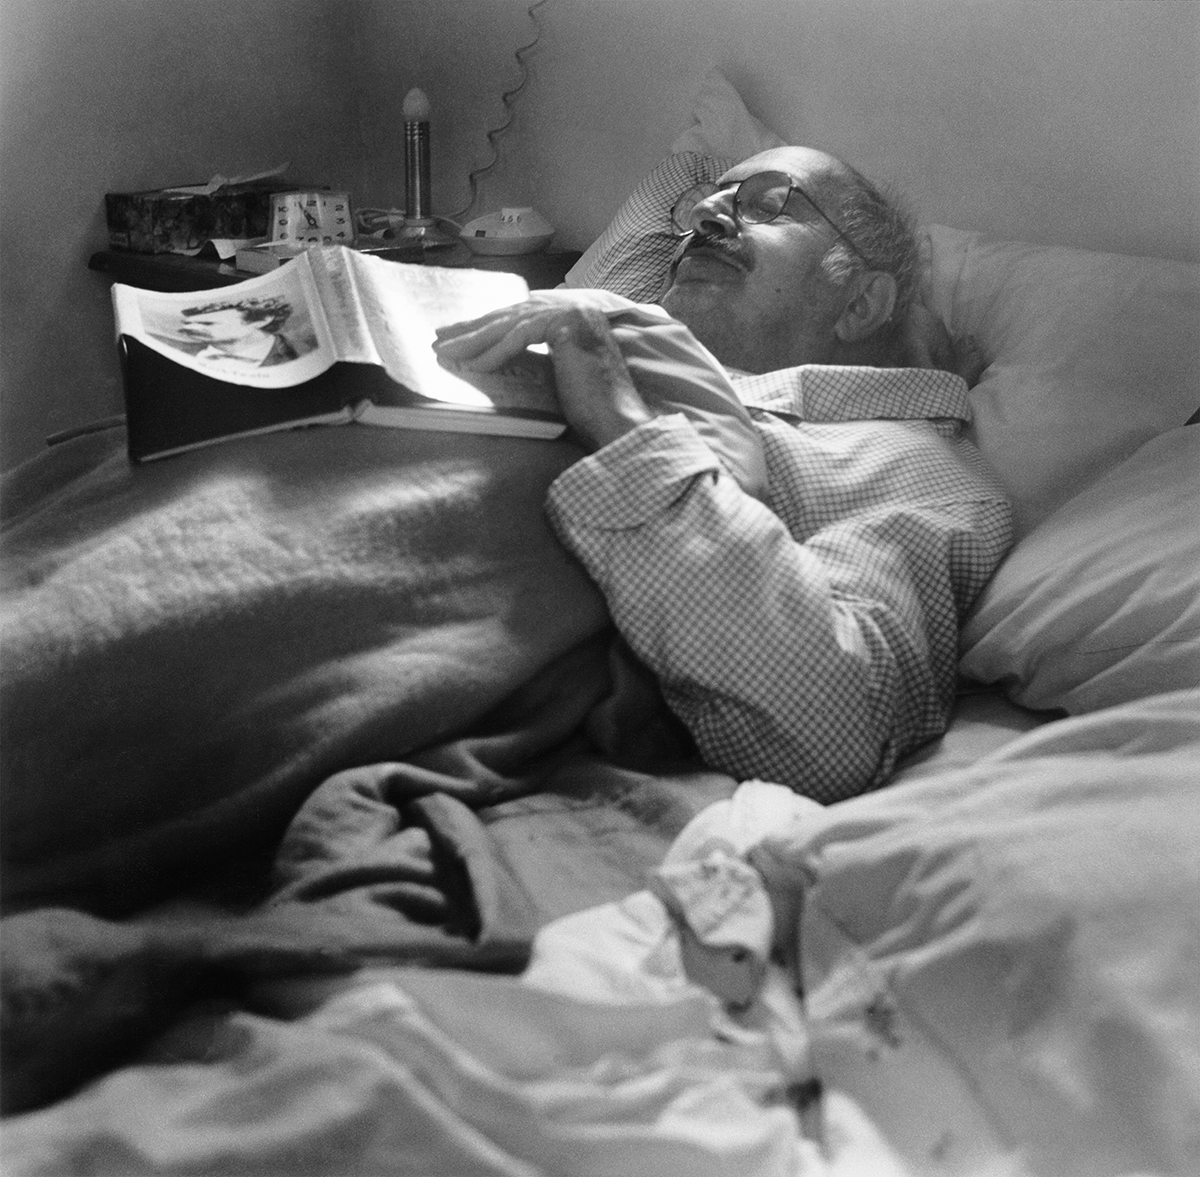 In this black-and-white photo, an older, light-skinned man wearing glasses lays in bed under the covers with his eyes closed as an open book rests on his chest. One hand holds the book and the other is reclined behind his head. A cluttered night stand is visible to the left. The man looks peaceful.